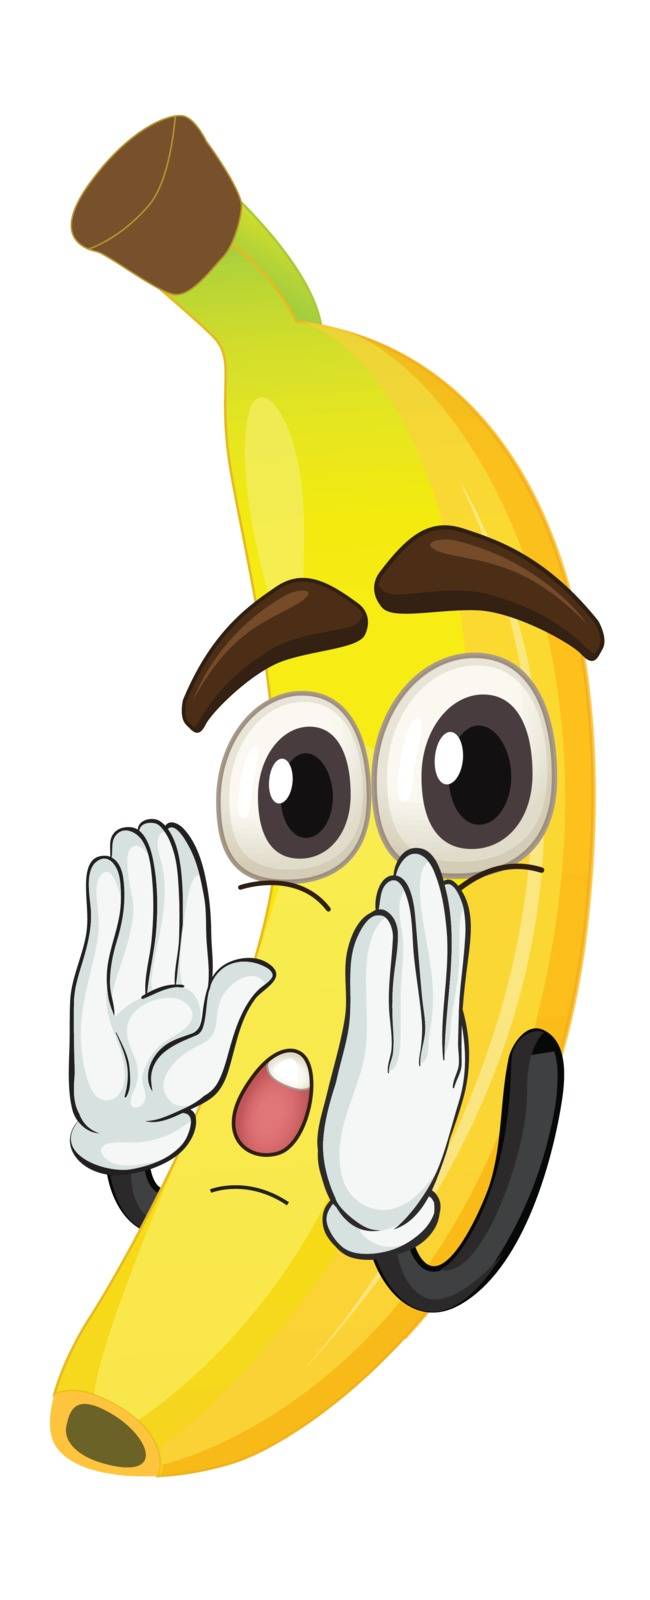 illustration of a banana on a white background